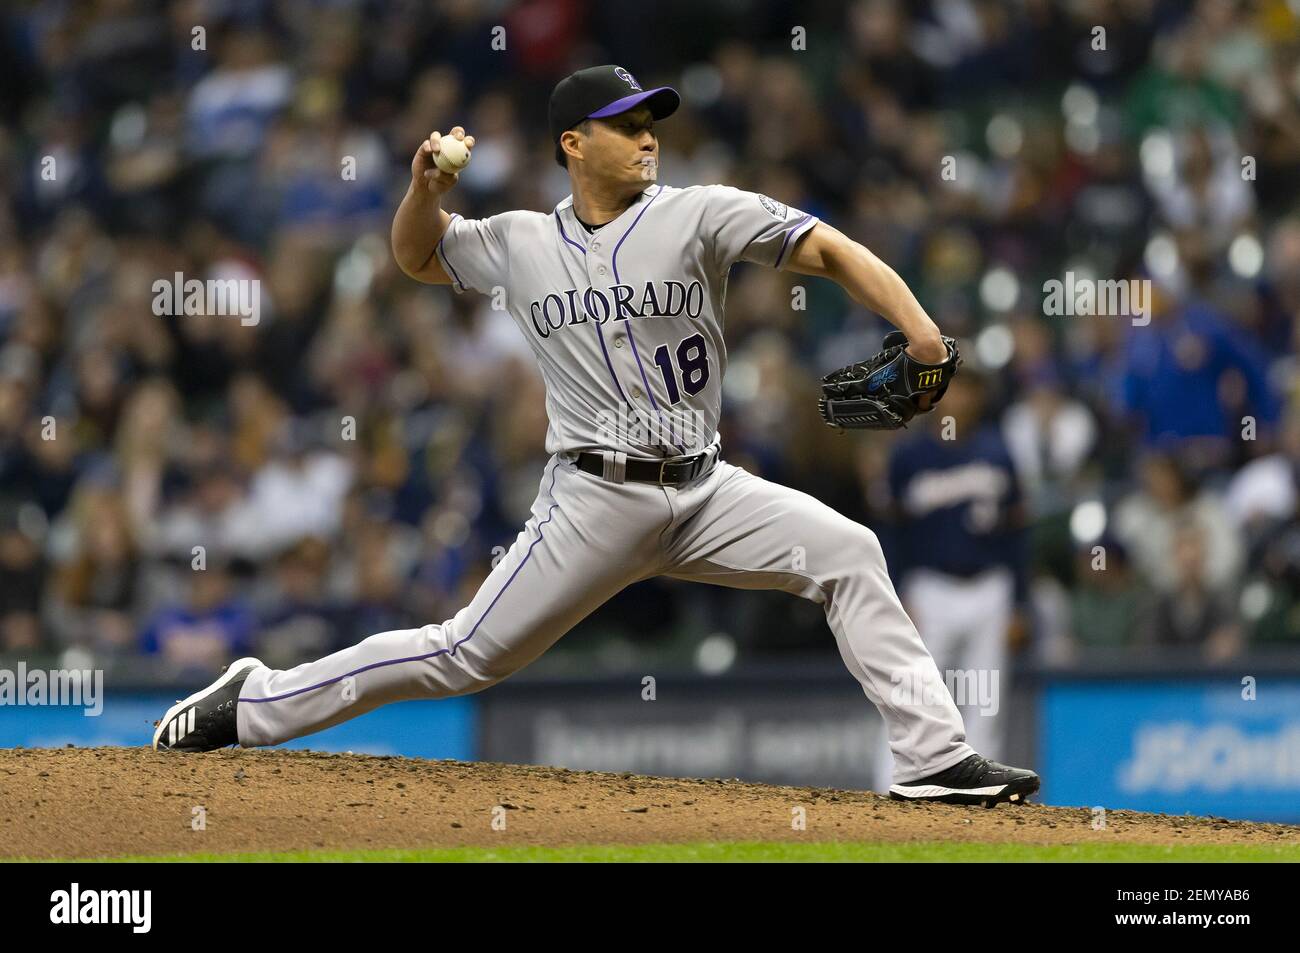 May 1, 2019: Colorado Rockies relief pitcher Seunghwan Oh #18 delivers a  pitch during the Major League Baseball game between the Milwaukee Brewers  and the Colorado Rockies at Miller Park in Milwaukee,